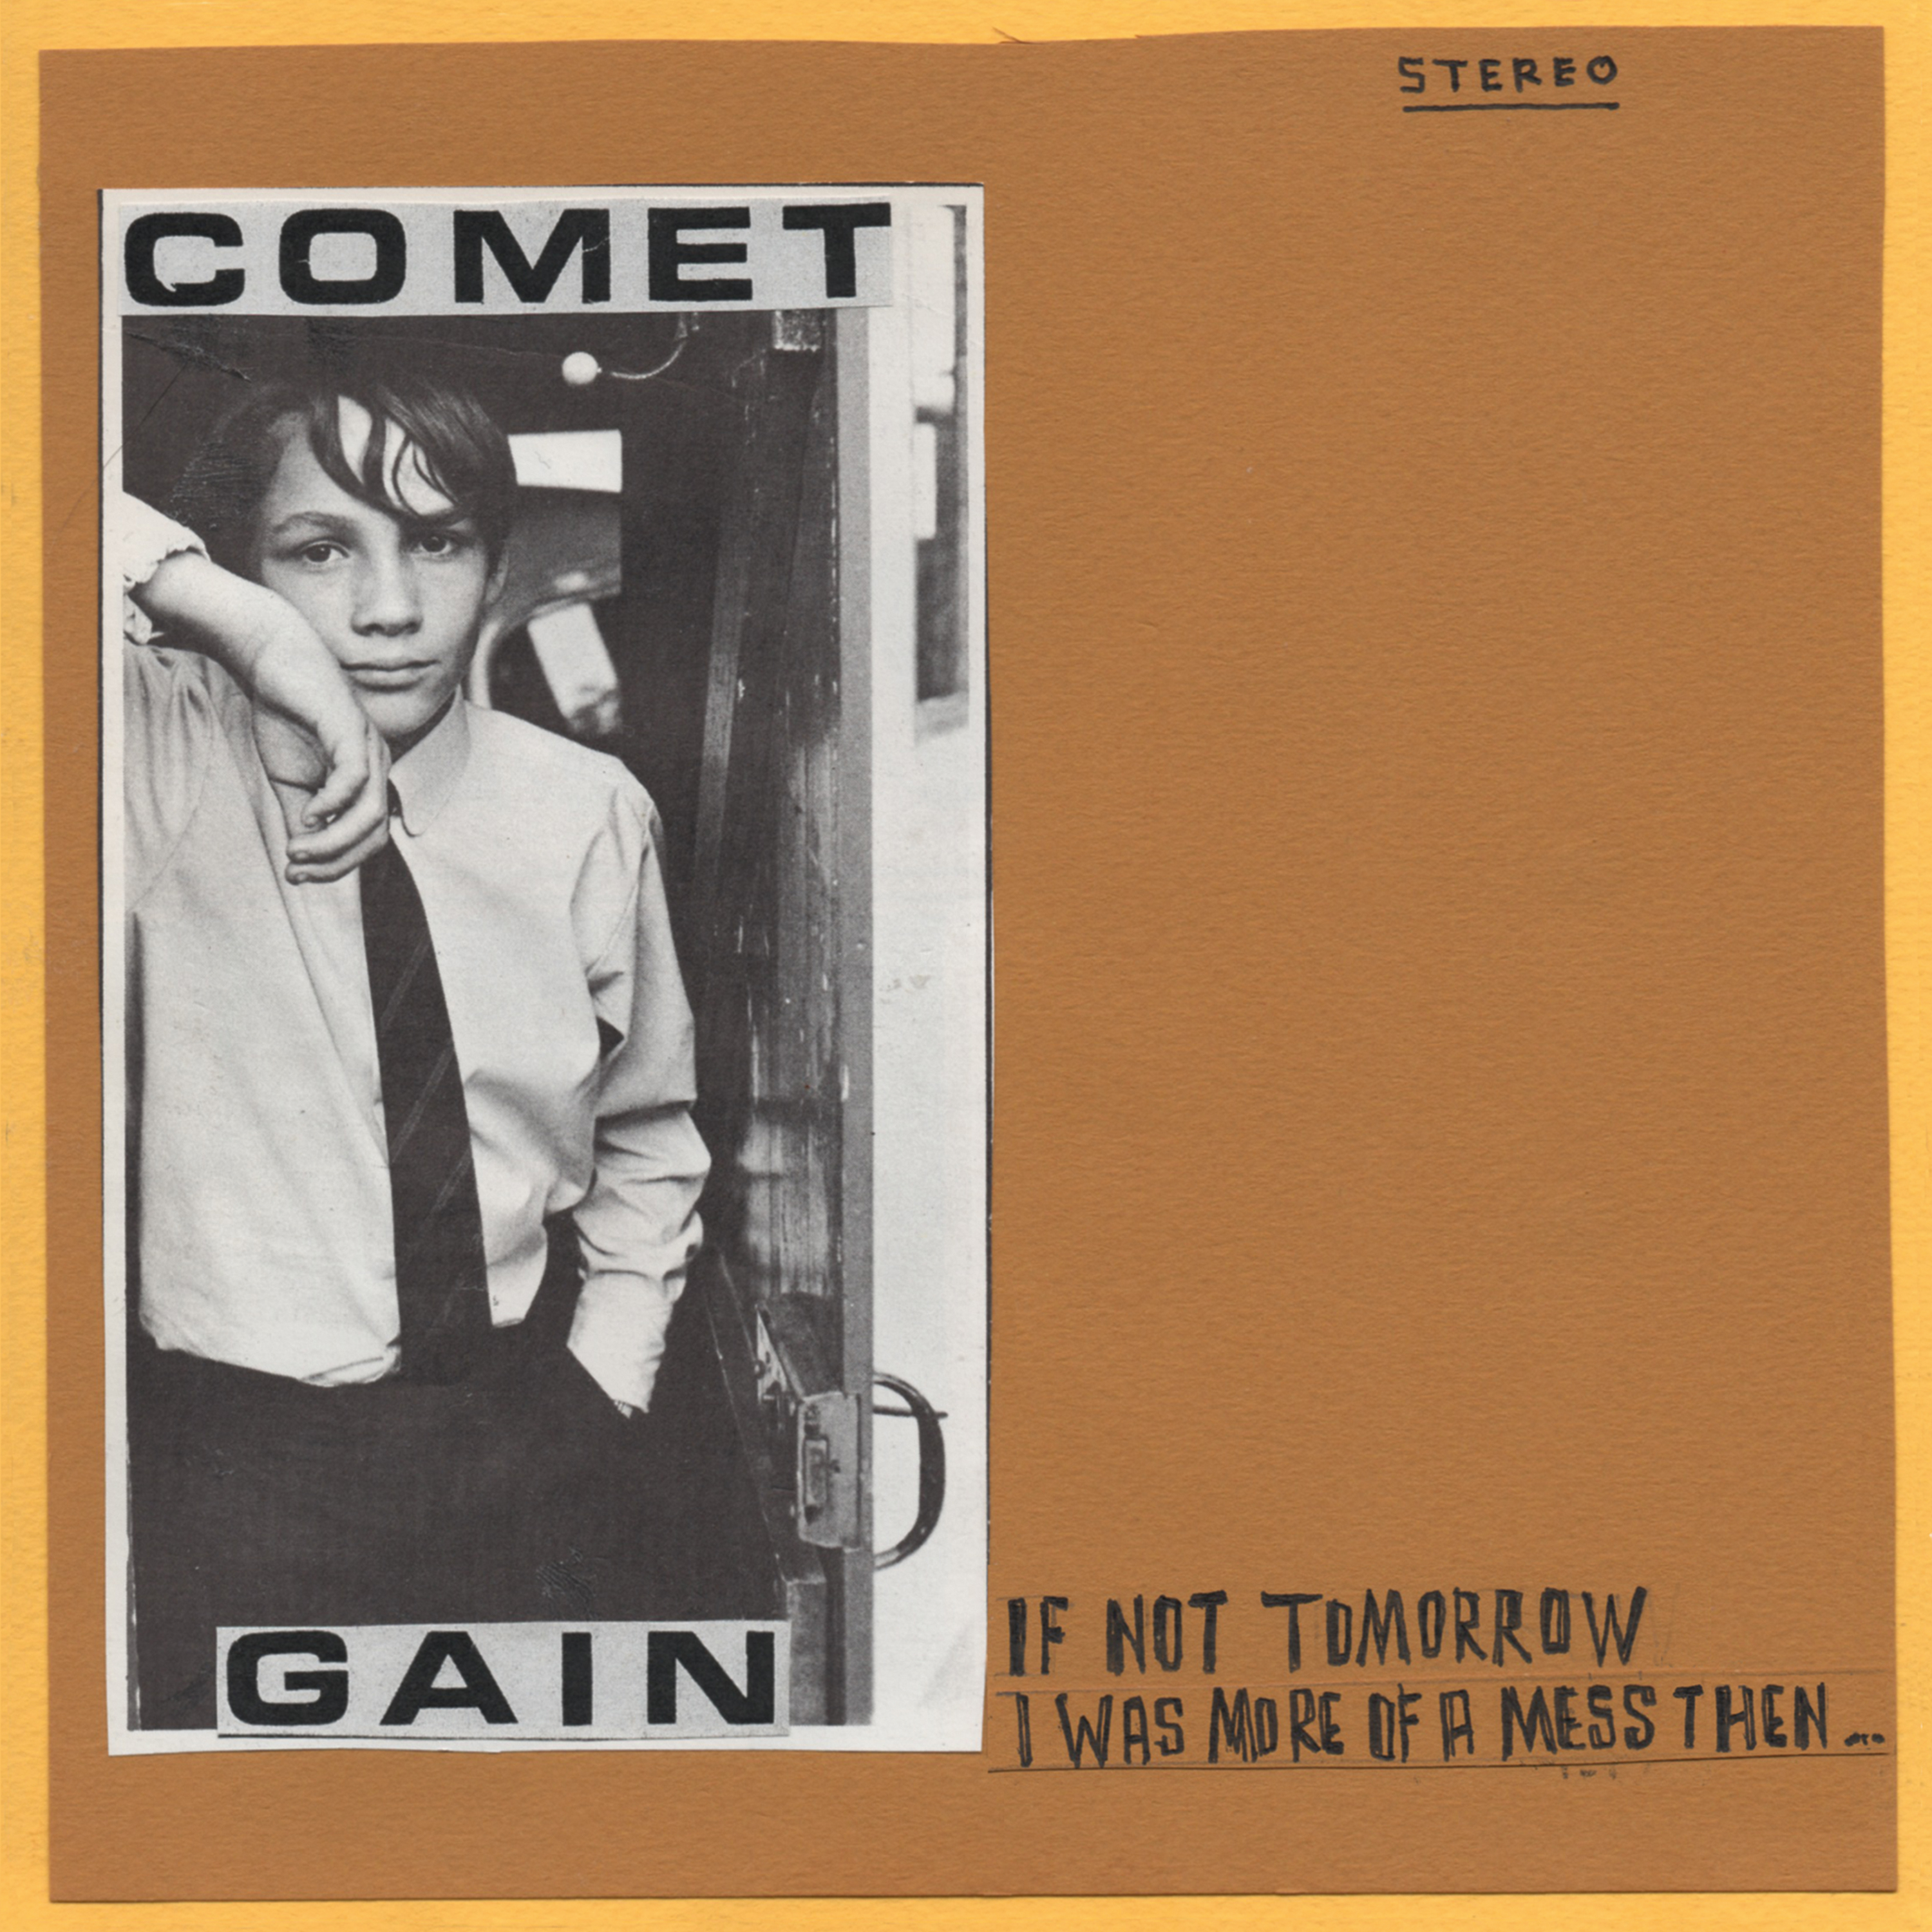 Comet Gain - If Not Tomorrow / I Was More Of A Mess Then (Limited 7" Single)